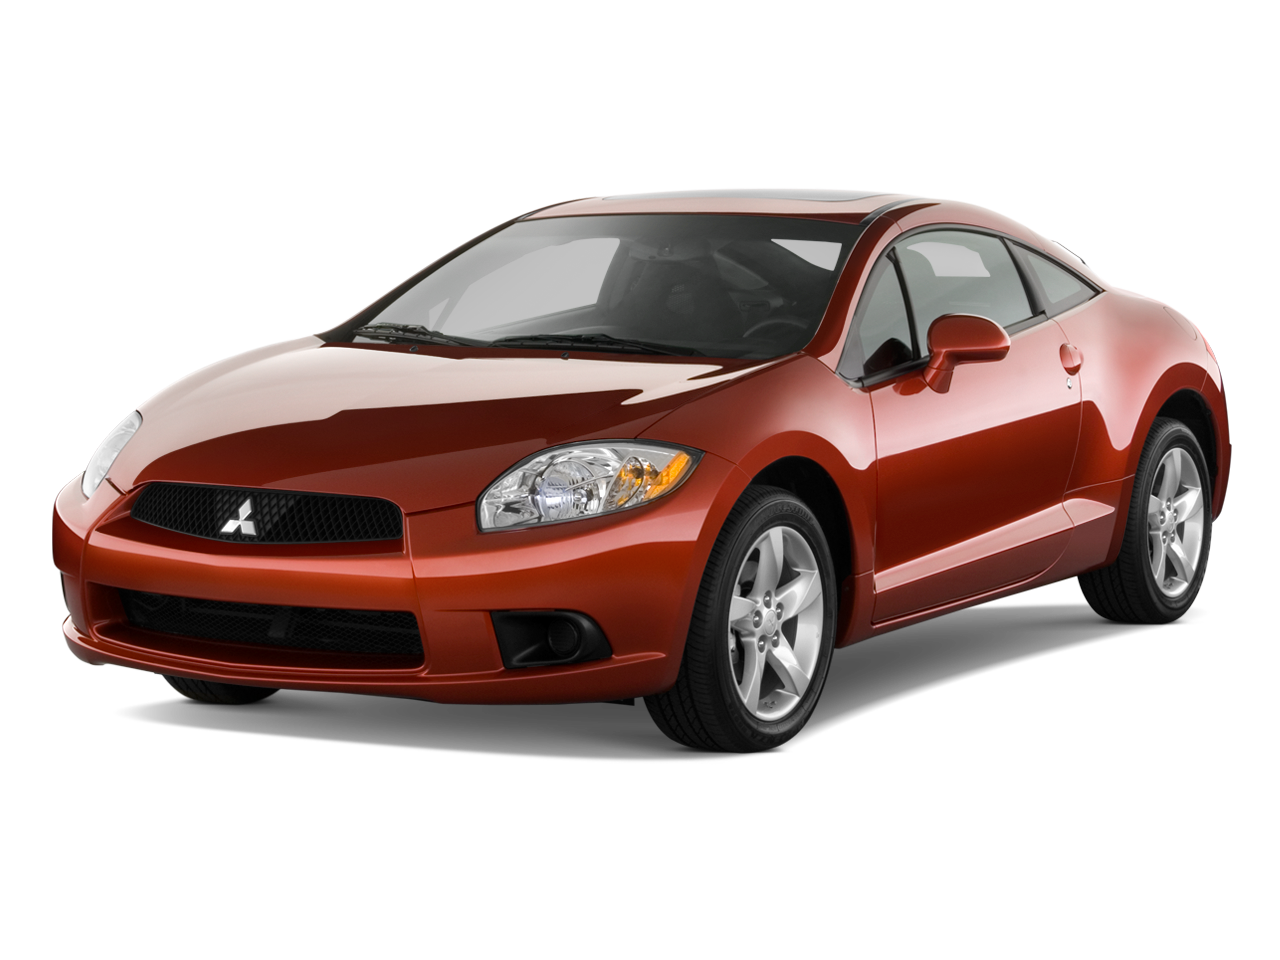 2010 Mitsubishi Eclipse Prices, Reviews, and Photos - MotorTrend